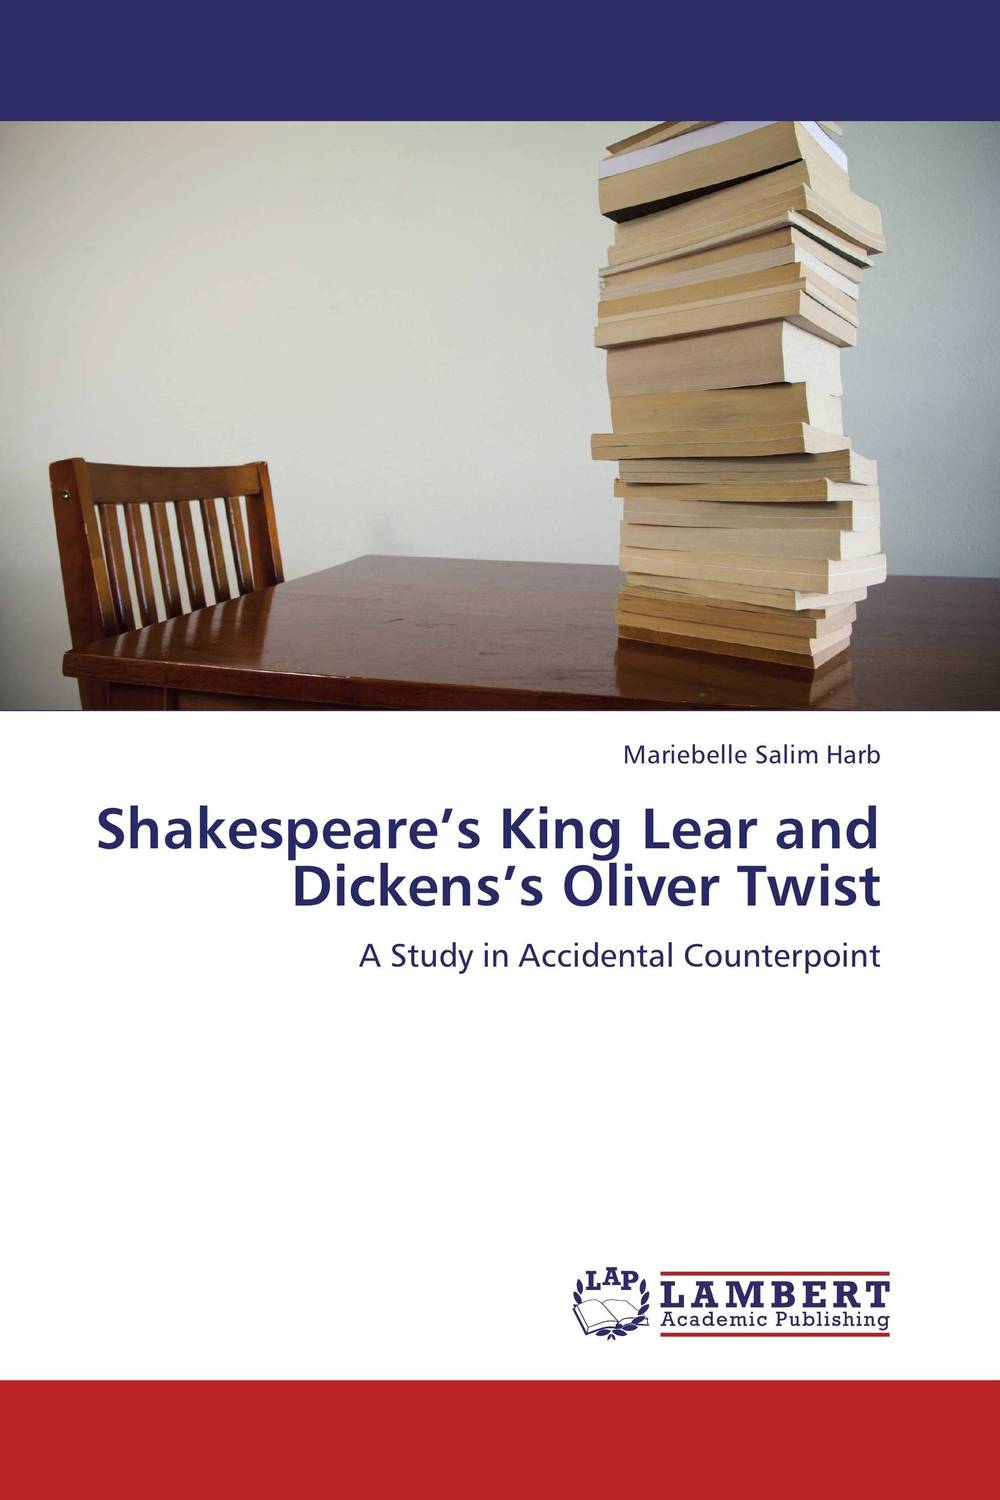 Shakespeare’s King Lear and Dickens’s Oliver Twist